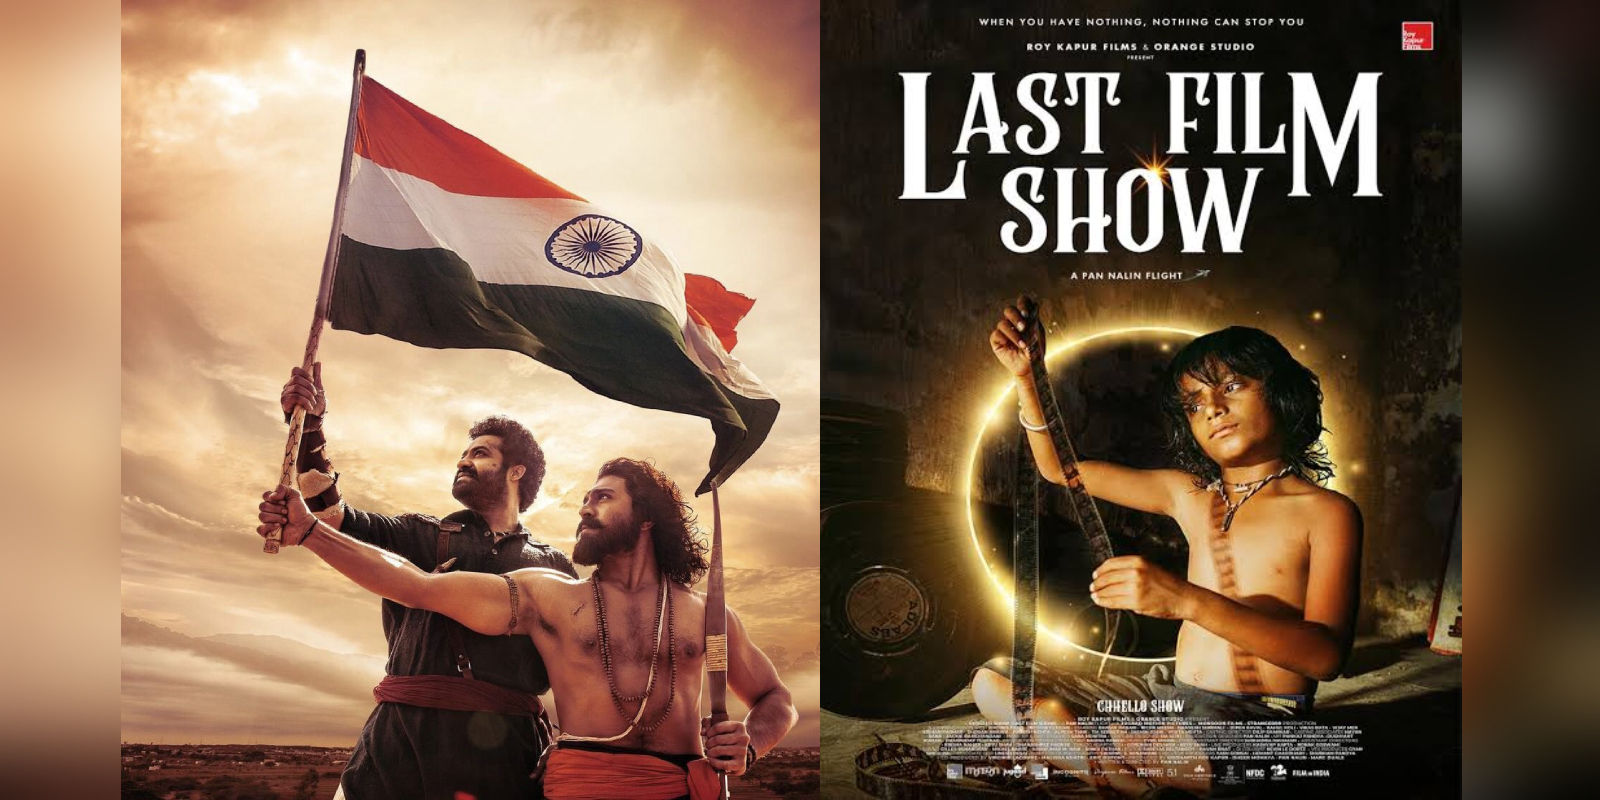 SS Rajamouli's 'RRR' lost out to Pan Nalin's 'Chhello Show' in the race to be India's official entry to the Oscars. (Twittter)